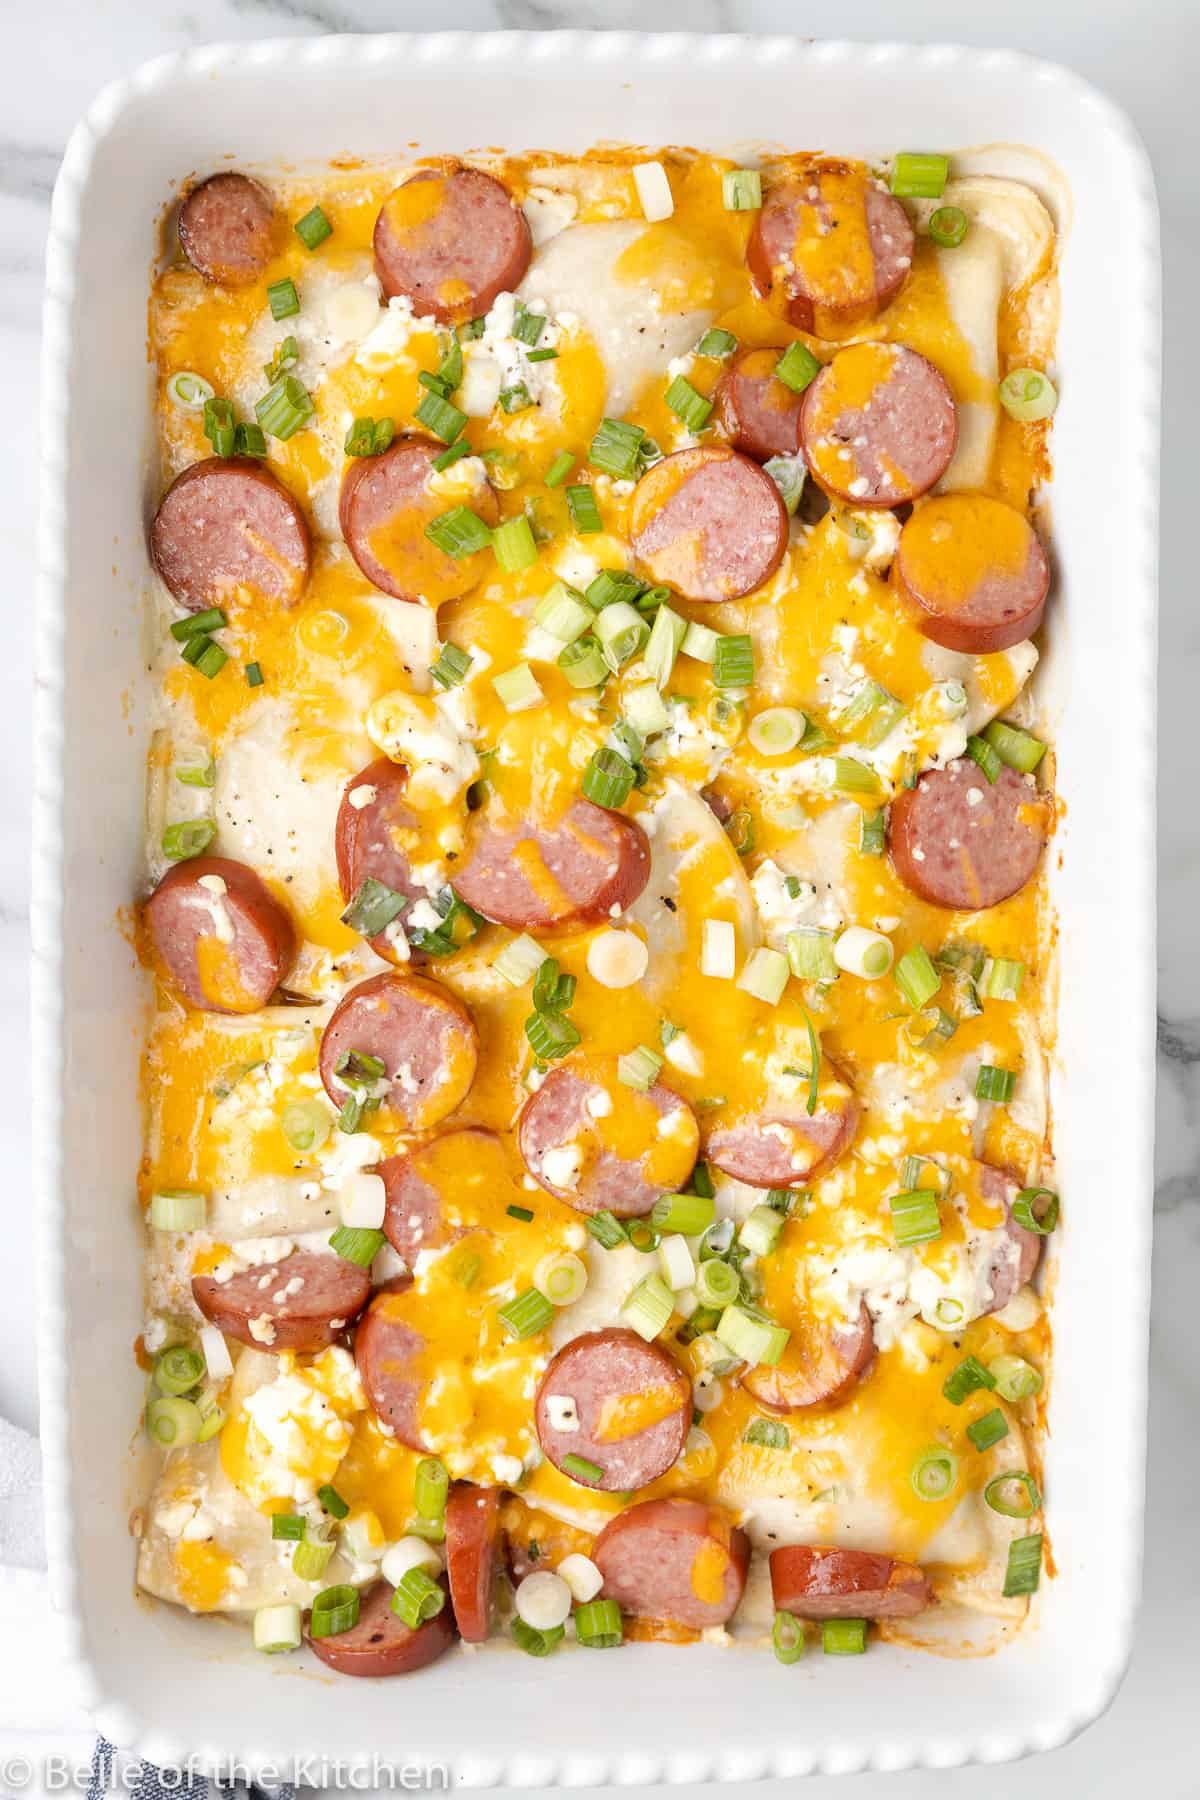 a casserole dish full of pierogies, sausage, cheese, and green onions.